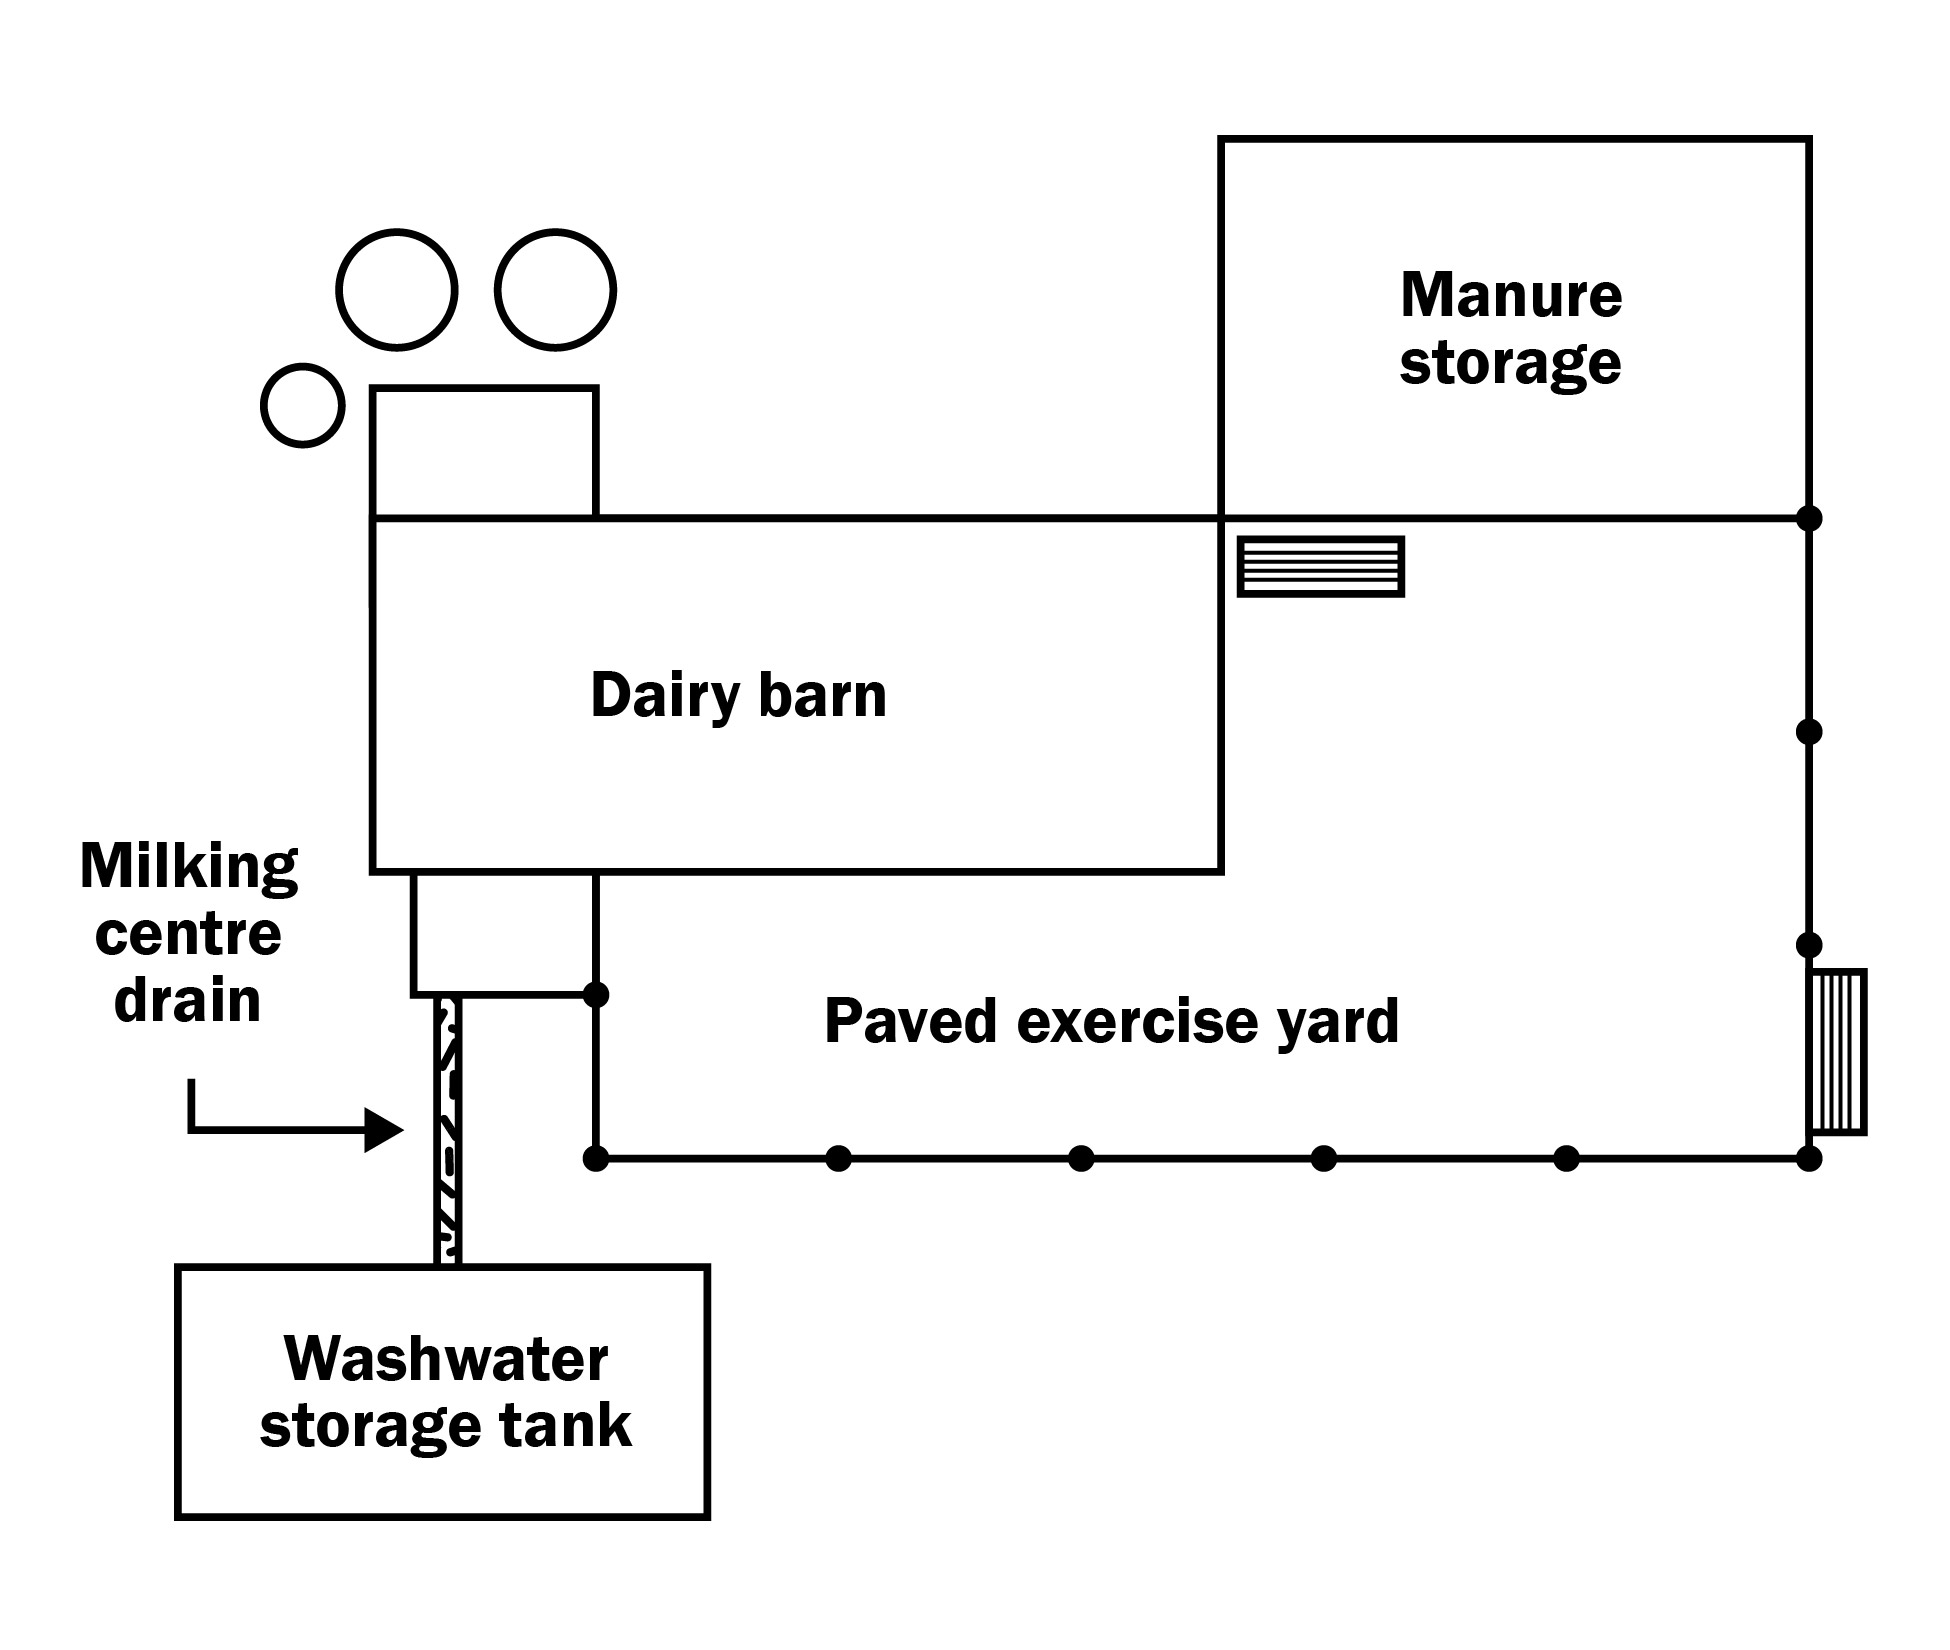 A drawing showing washwater stored within a separate storage on a general dairy operation.